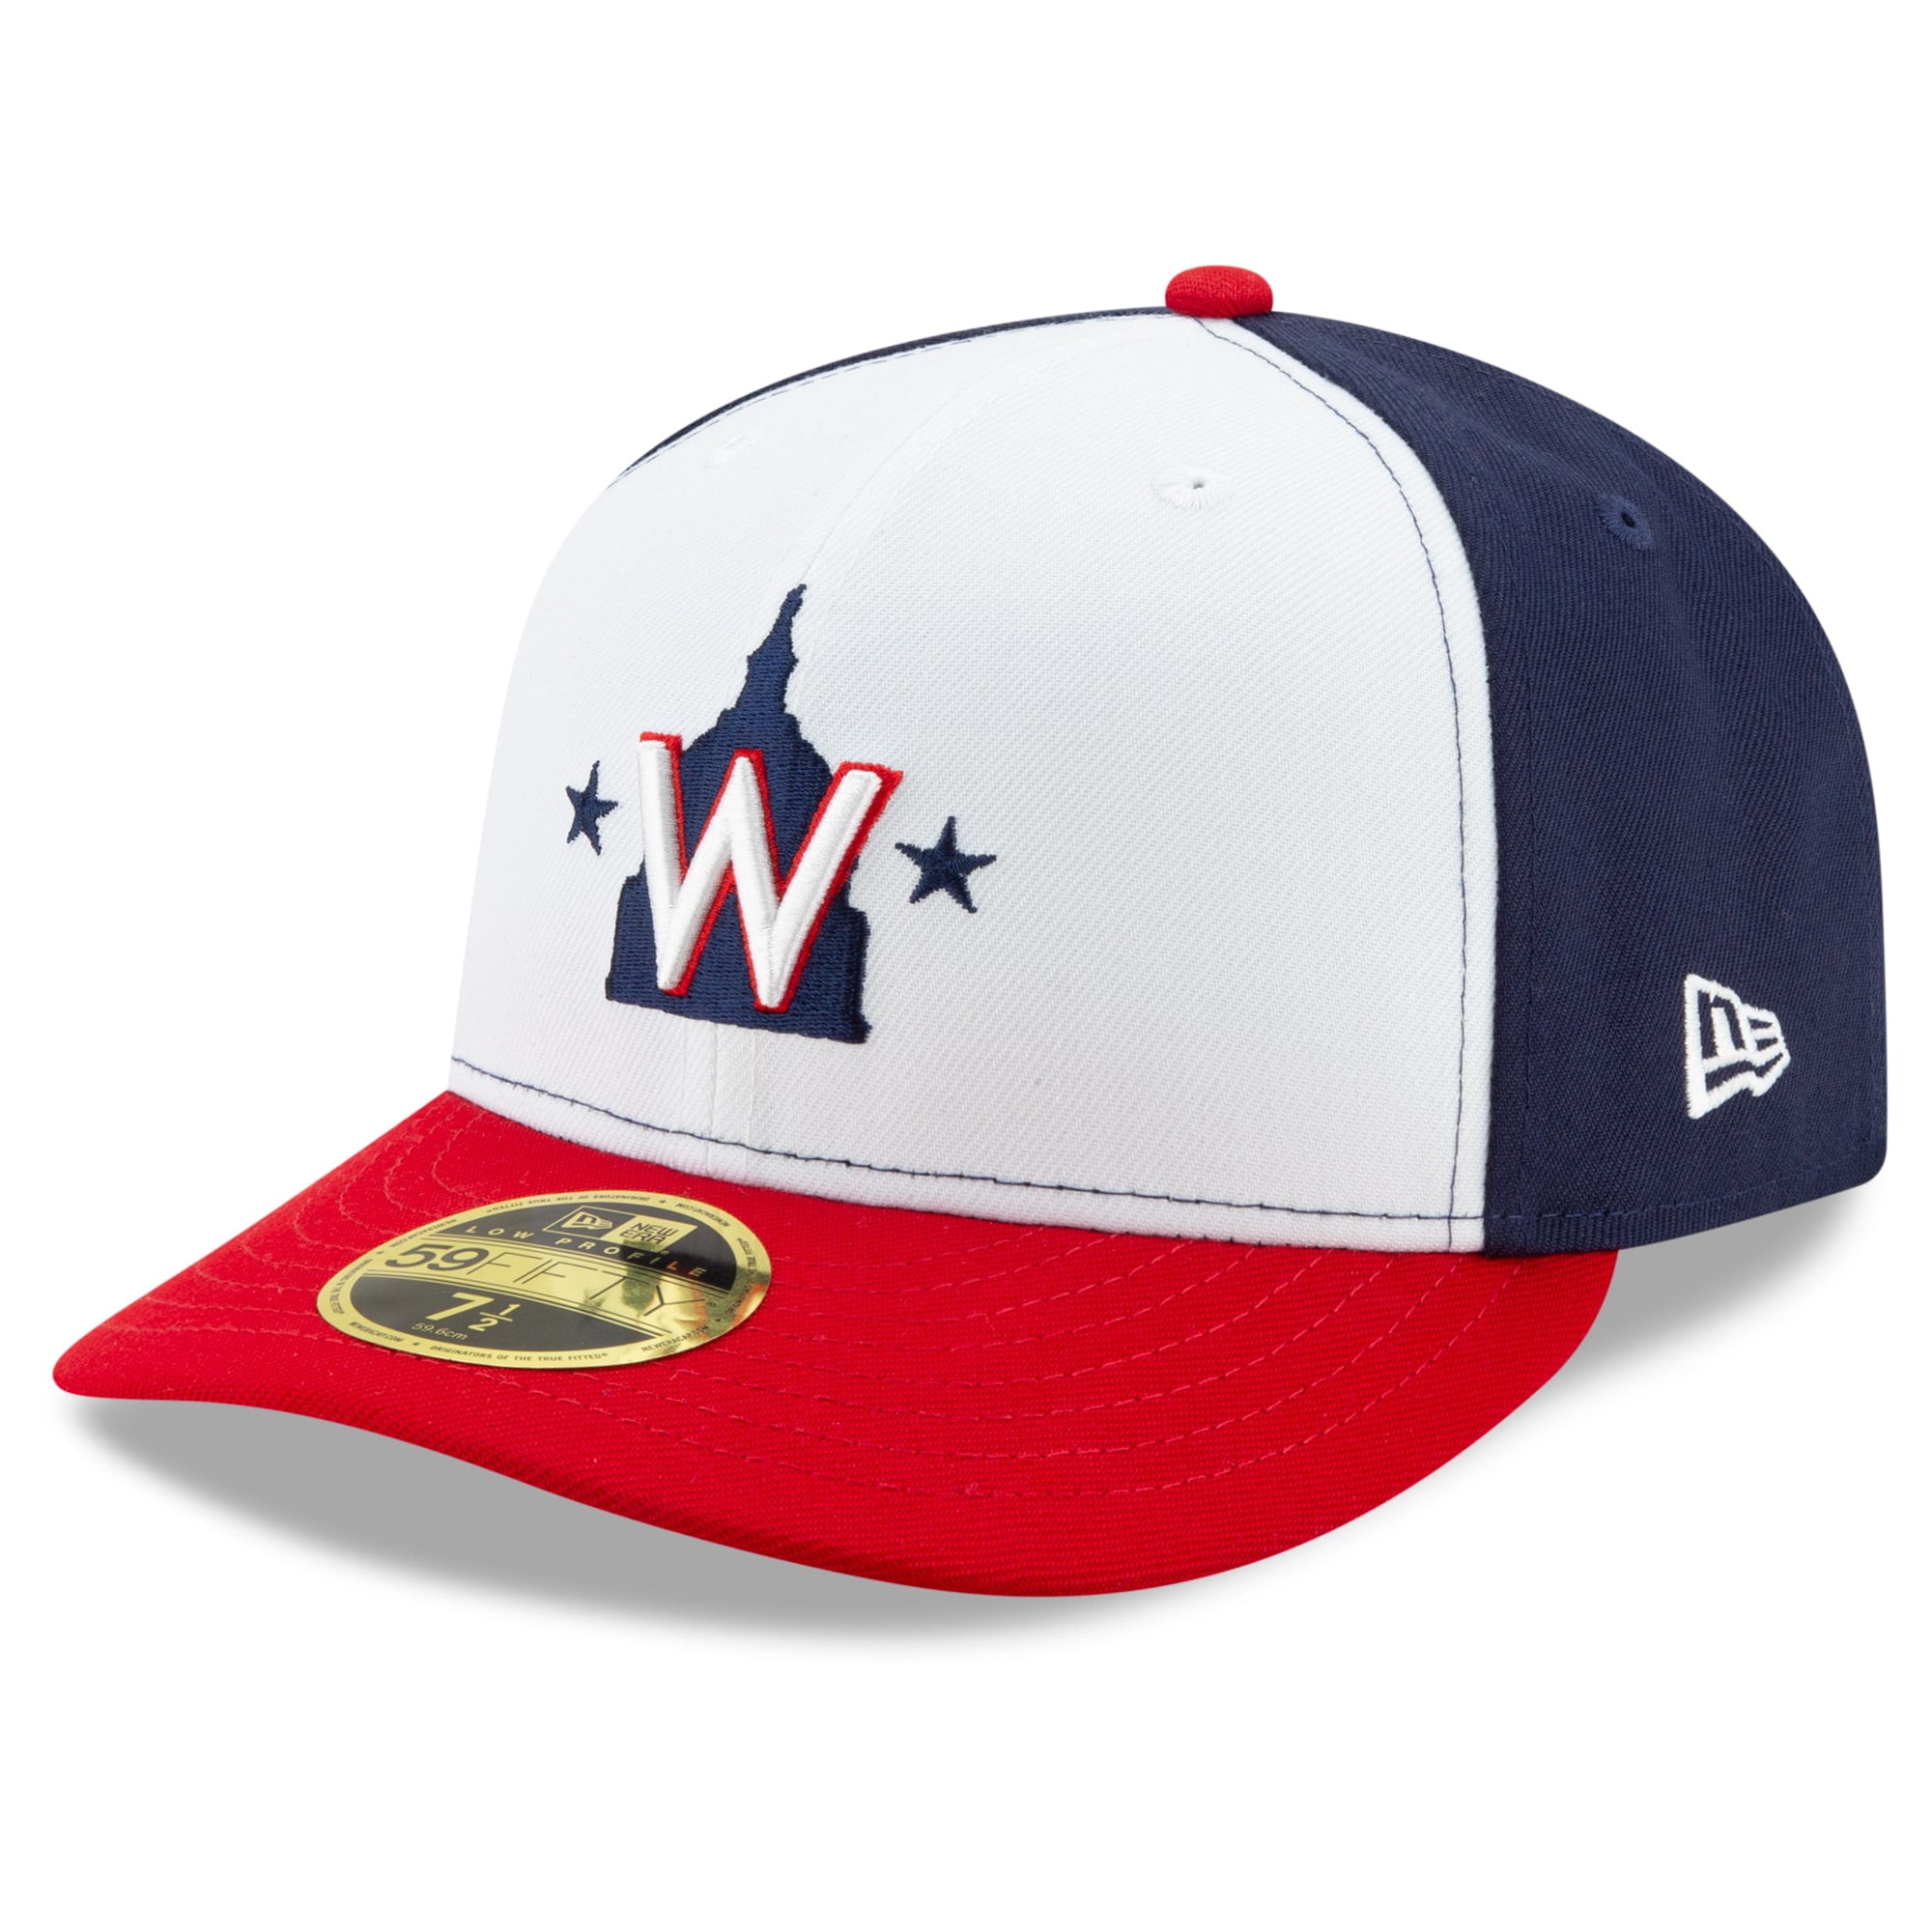 Fitted Hat - White/Navy - Walmart.com 